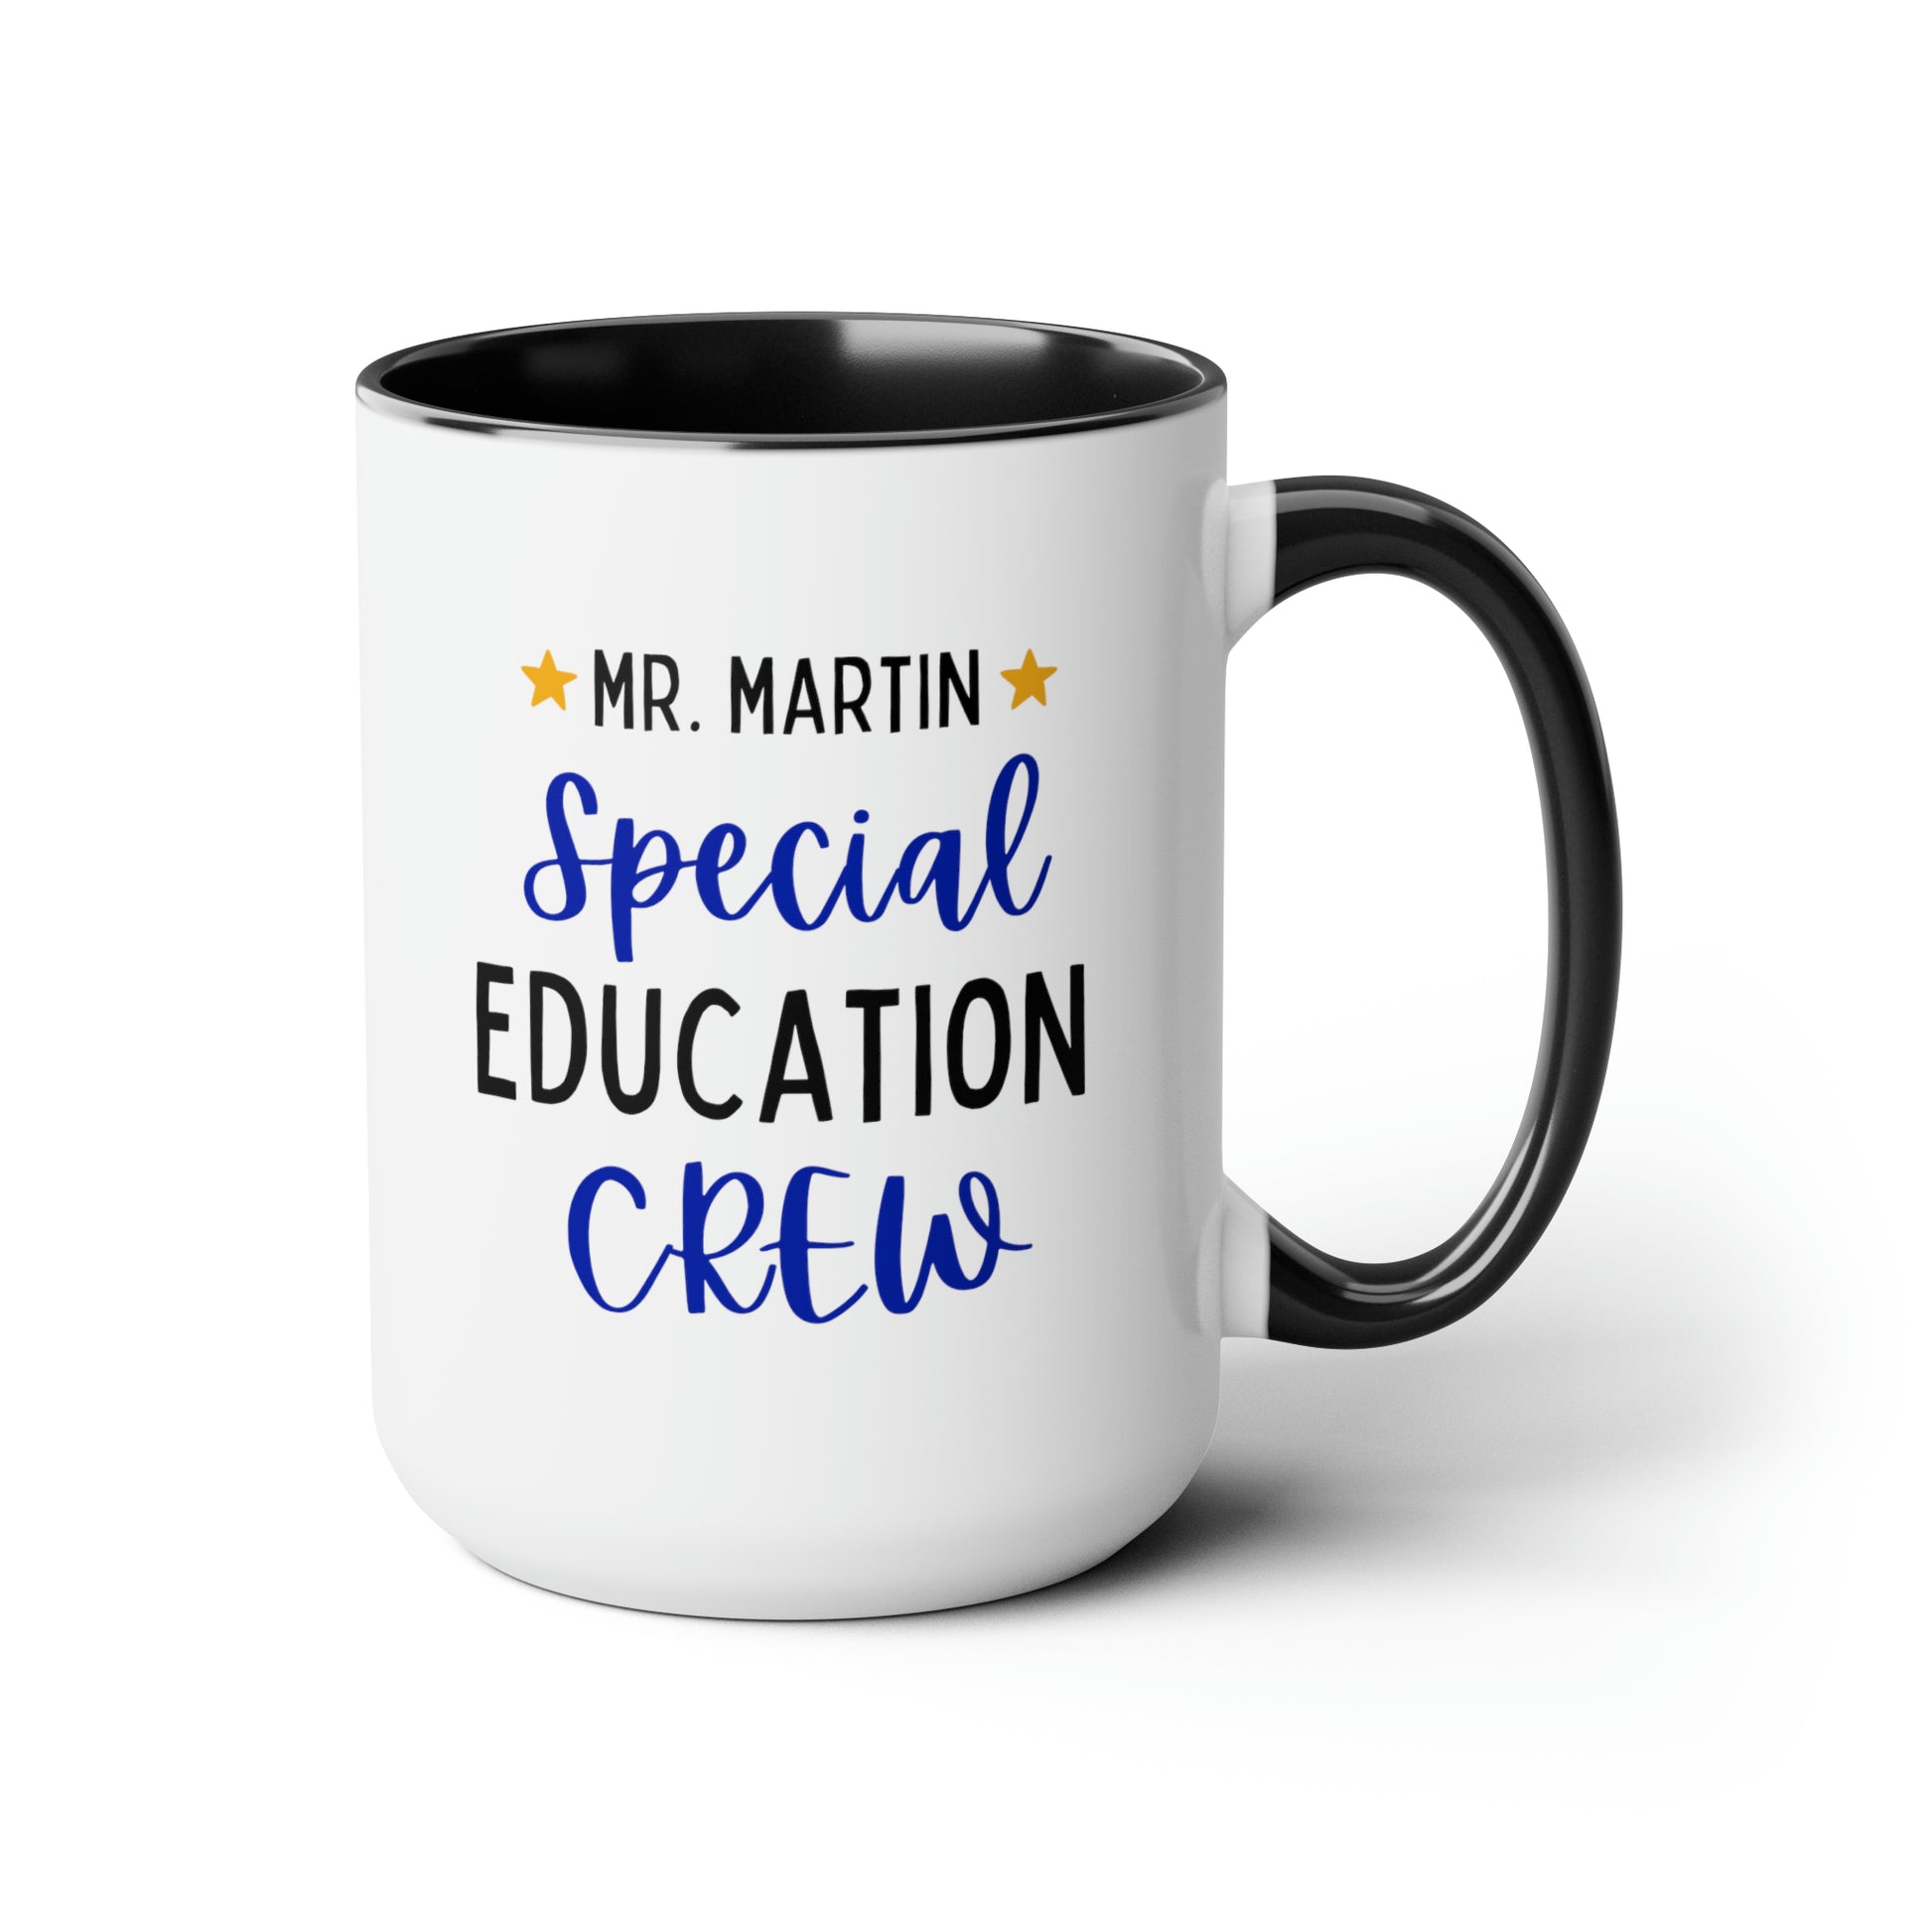 Special Education Crew 15oz white with black accent funny large coffee mug gift for  teacher SPED custom personalized customize name  waveywares wavey wares wavywares wavy wares